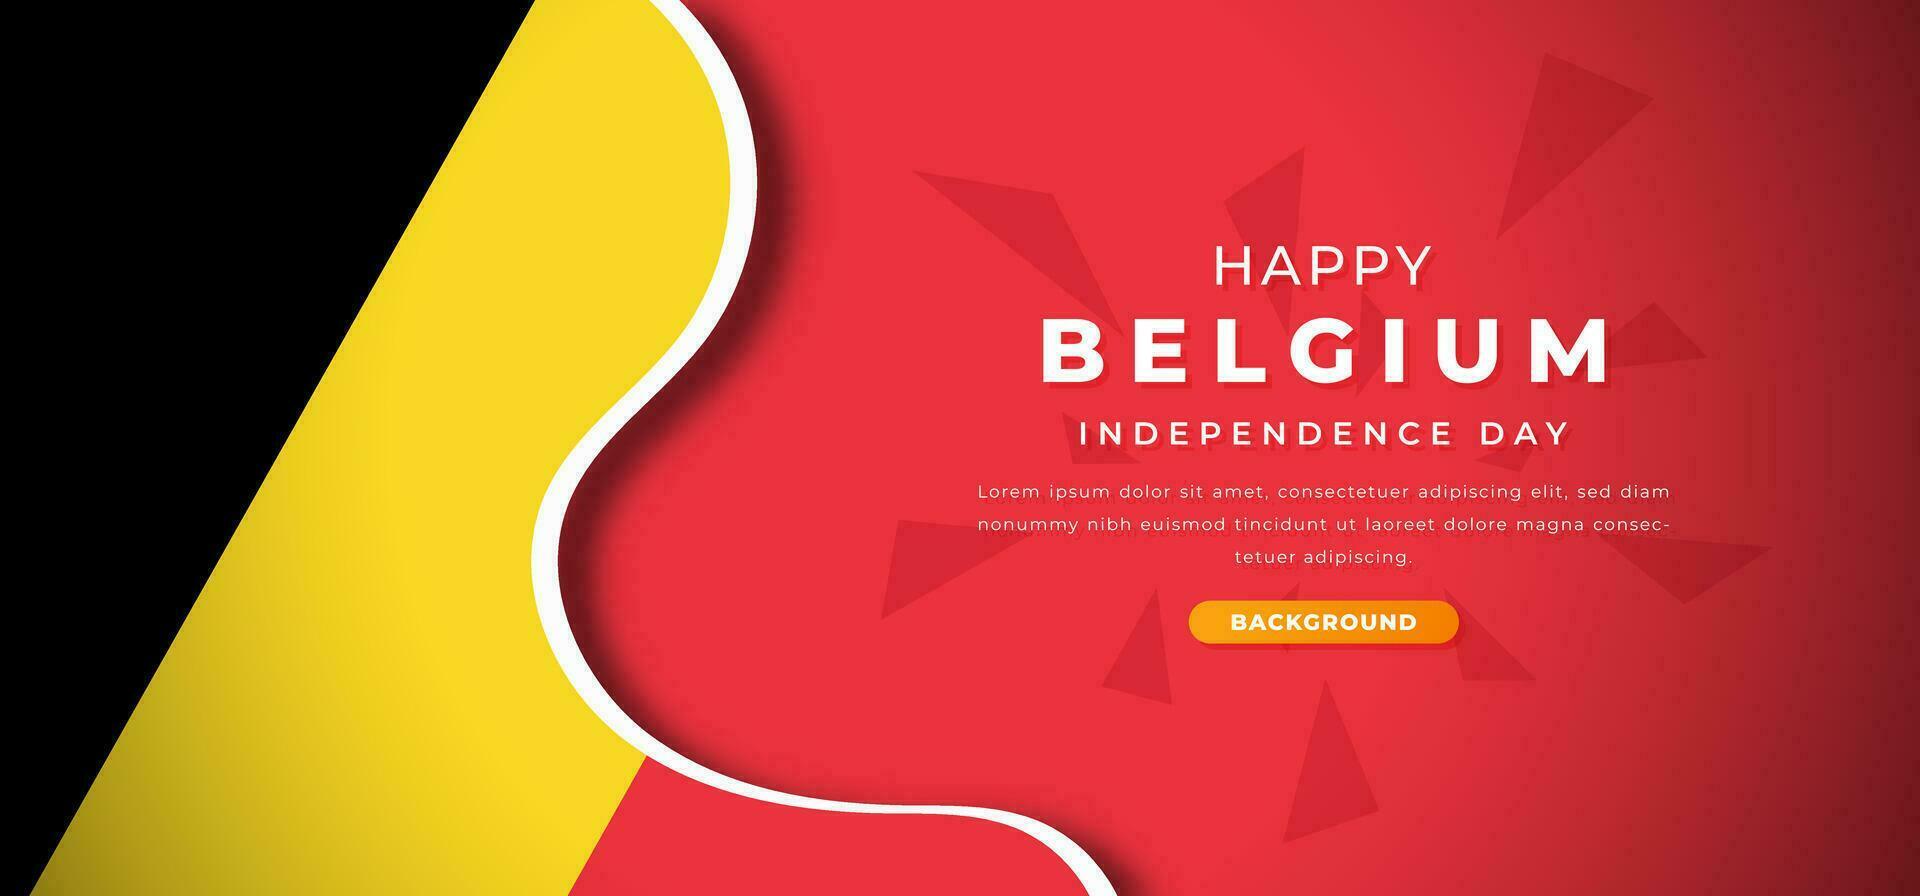 Happy Belgium Independence Day Design Paper Cut Shapes Background Illustration for Poster, Banner, Advertising, Greeting Card vector